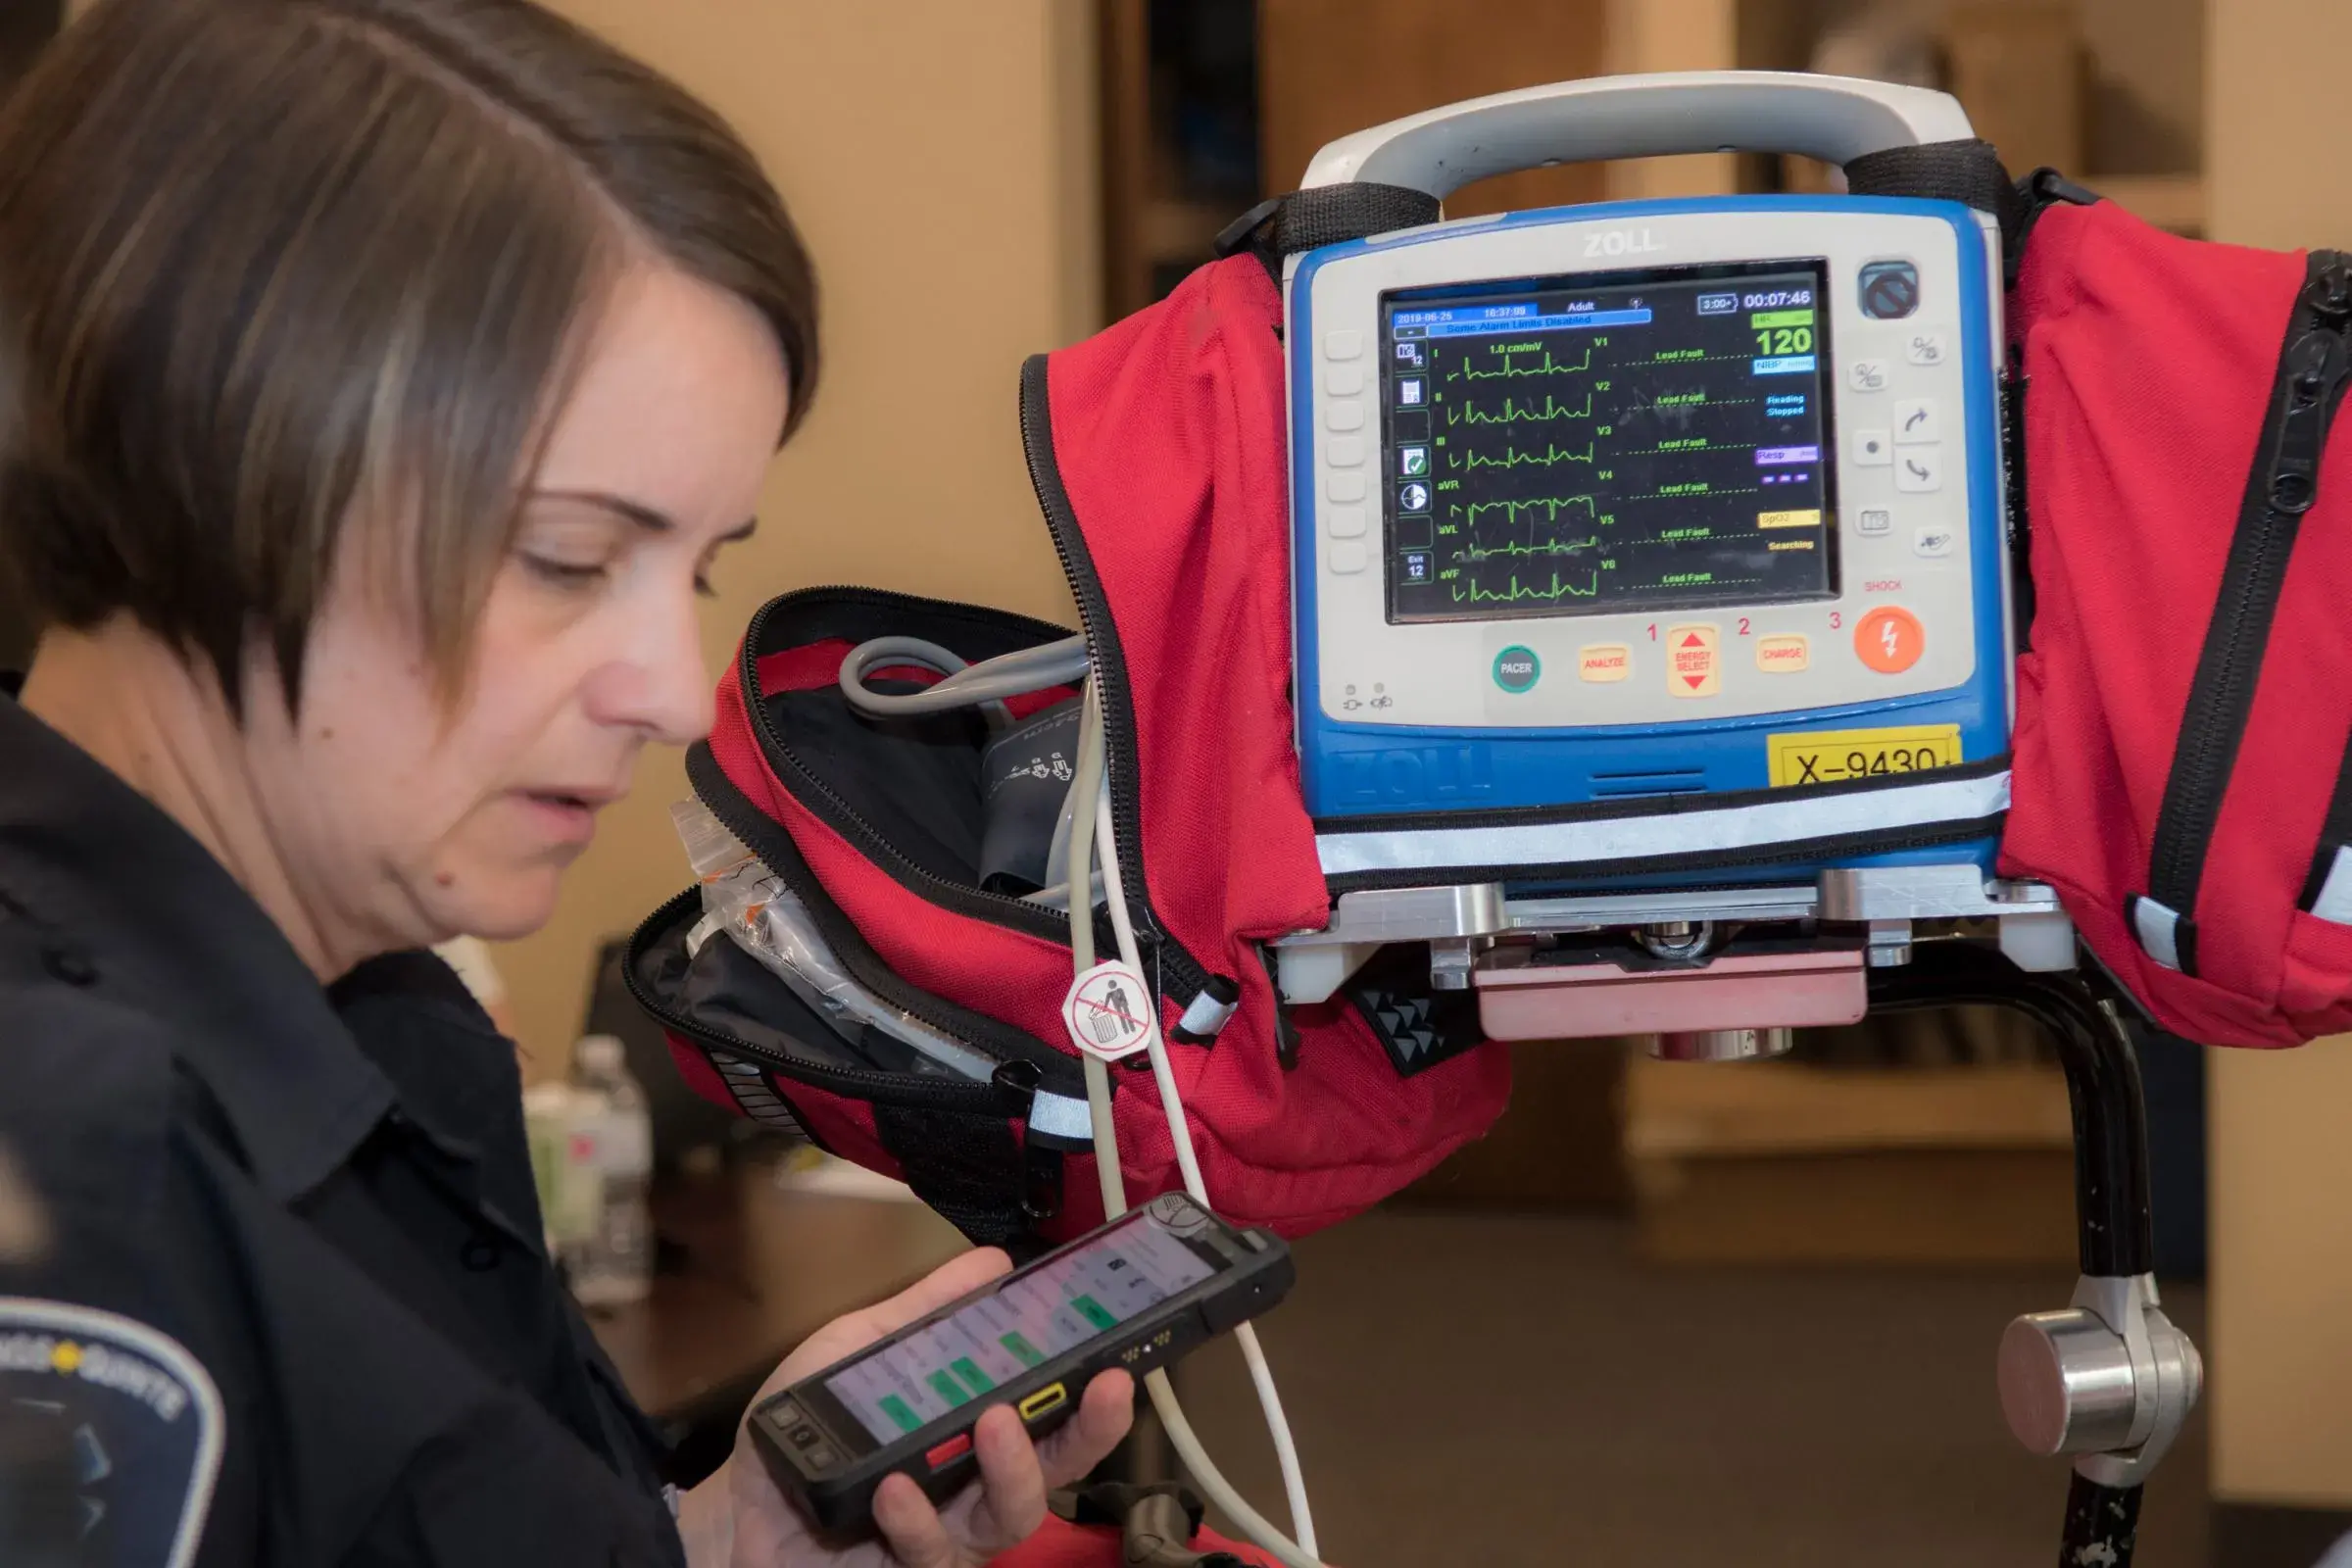 AUDREY’s image and voice recognition capabilities are promising to paramedics during emergency situations. Photo credit: DHS S&T/DRDC CSS